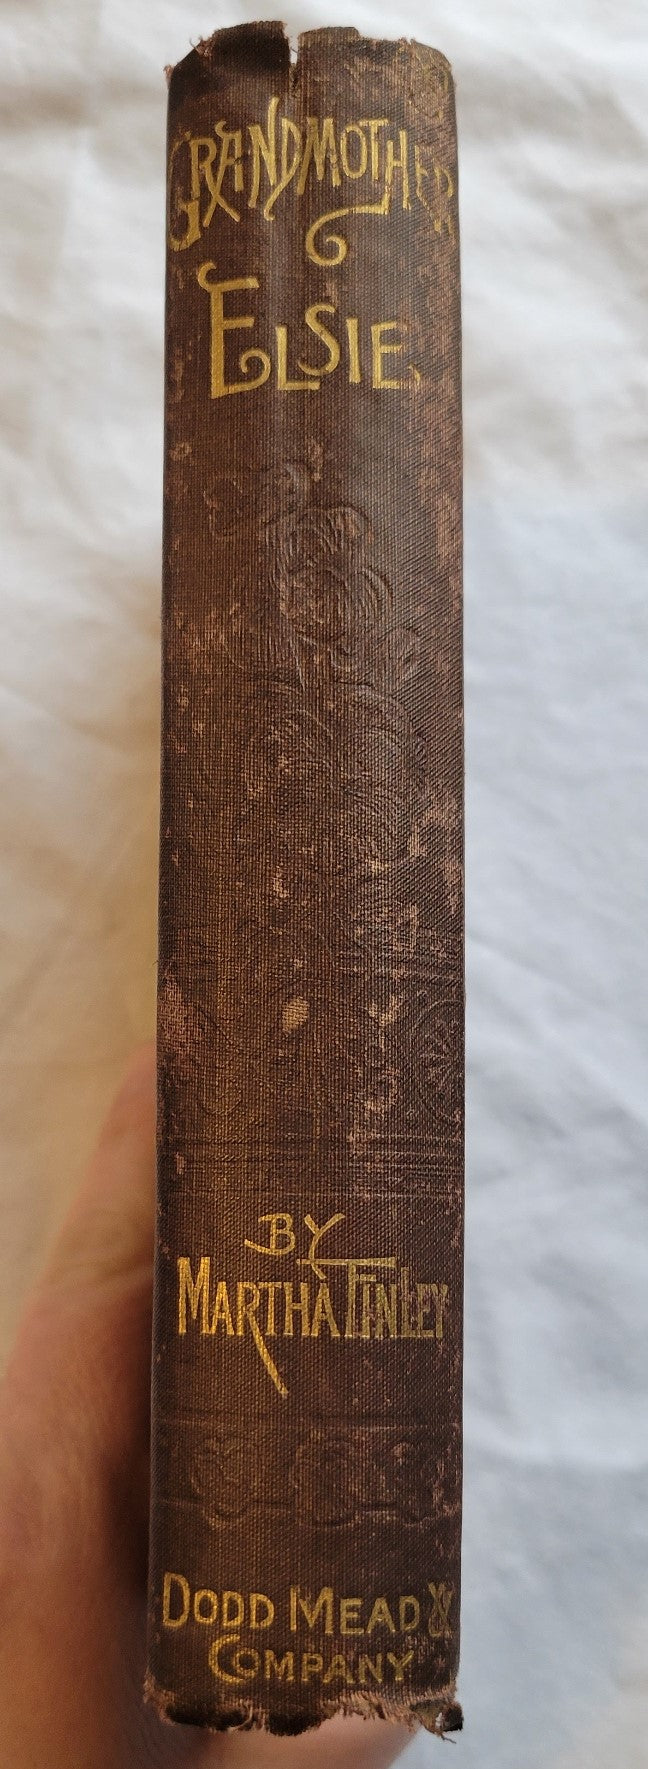 Antique book for sale "Grandmother Elsie" by Martha Finley, published by Dodd, Mead, & Company, copyright 1882.  This is the 8th book in the Elsie Dinsmore series.  View of spine.